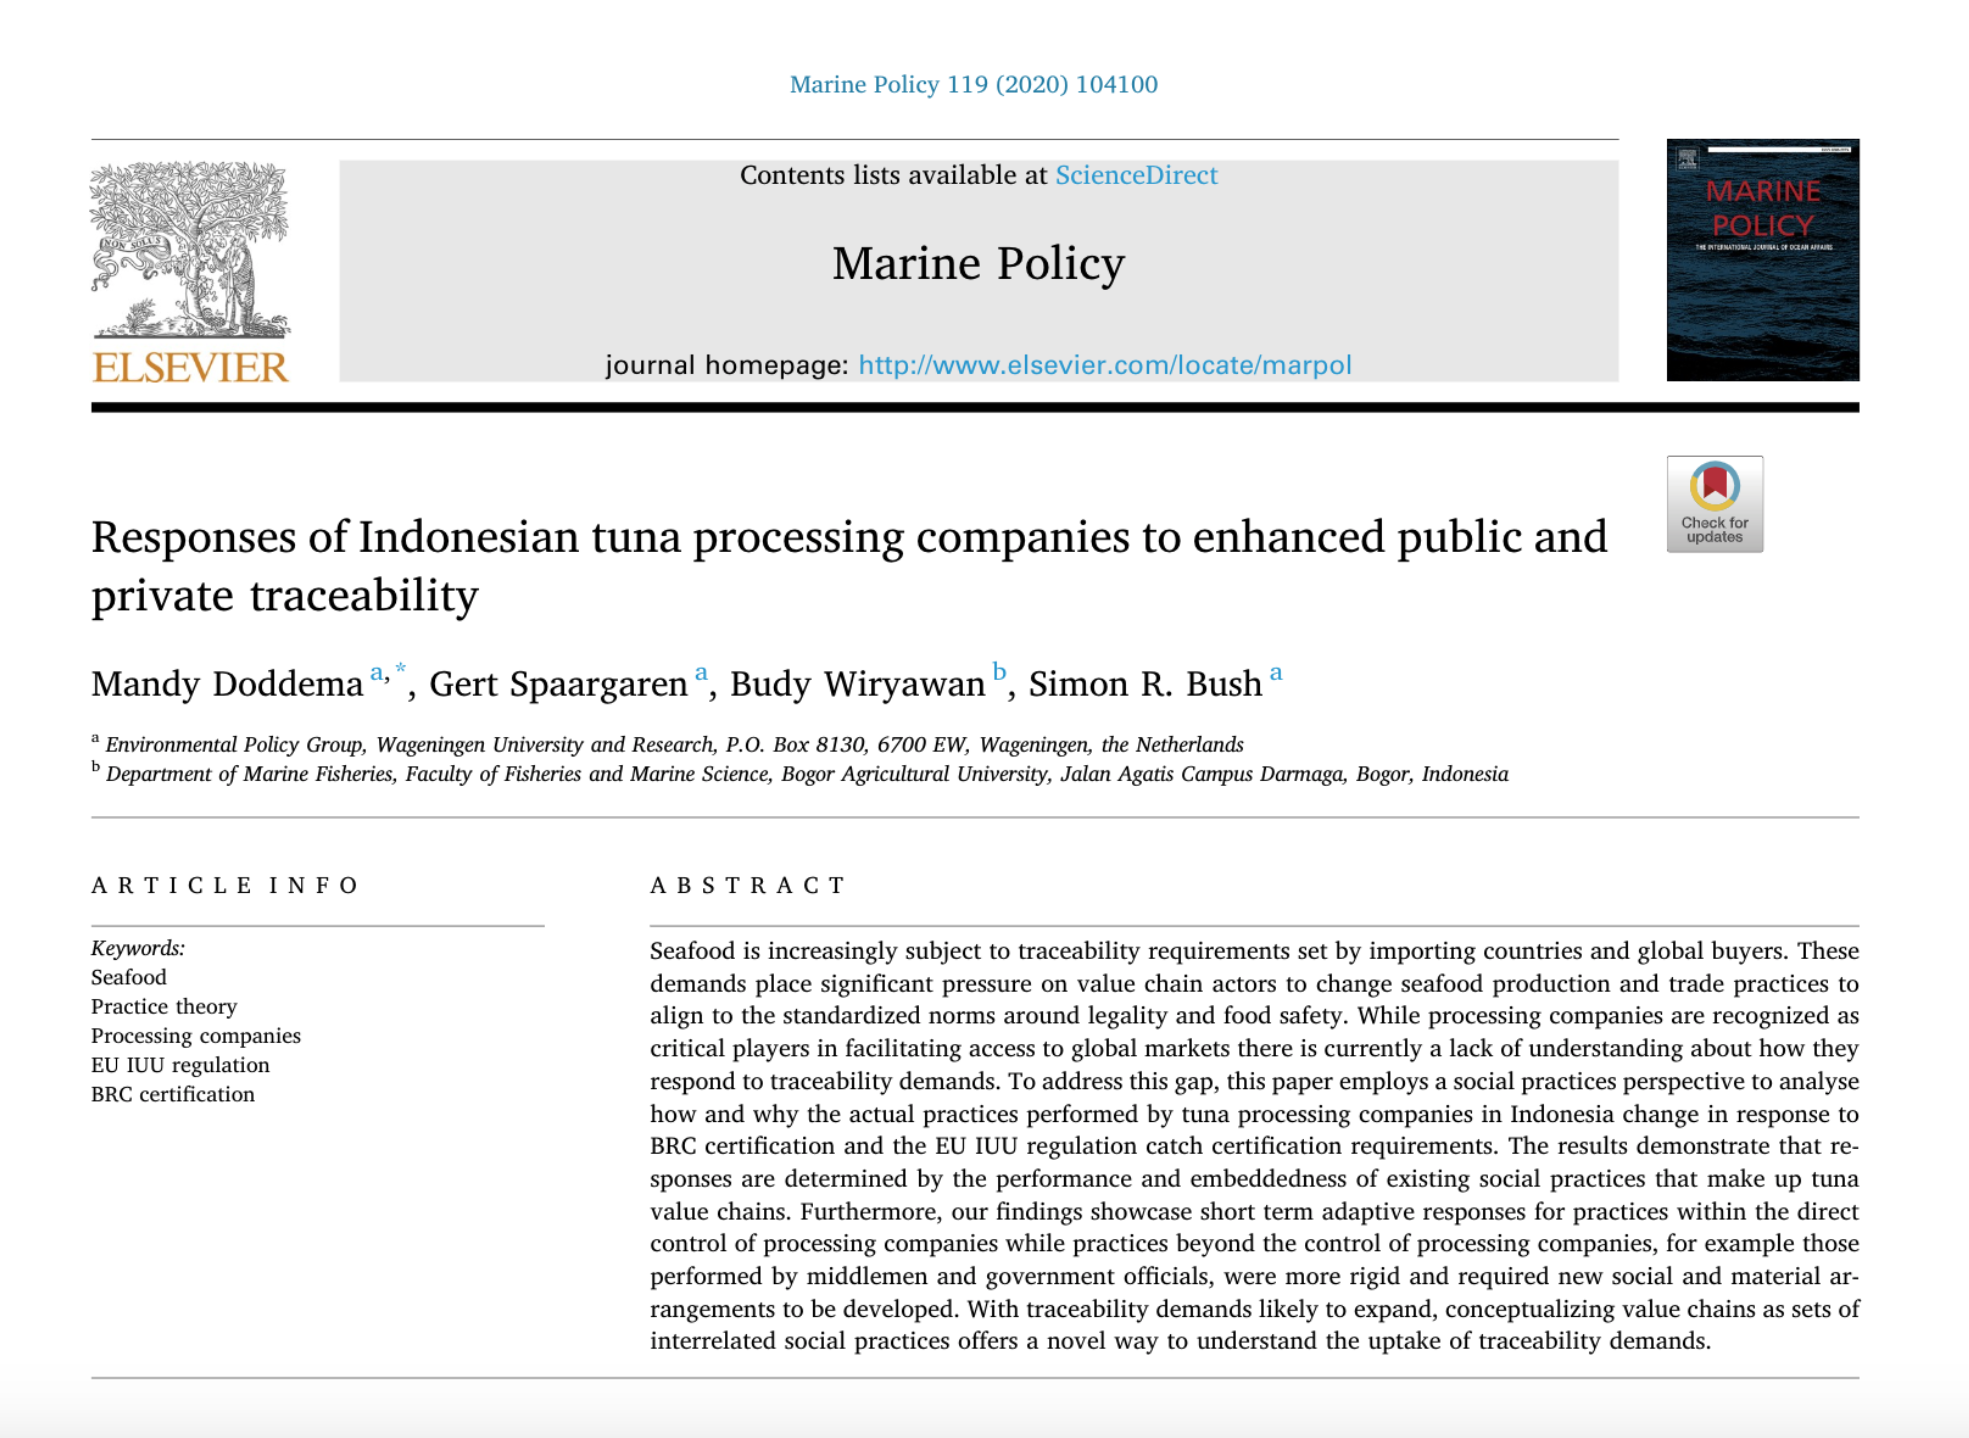 Responses of Indonesian Tuna Processing Companies to Enhanced Public and Private Traceability